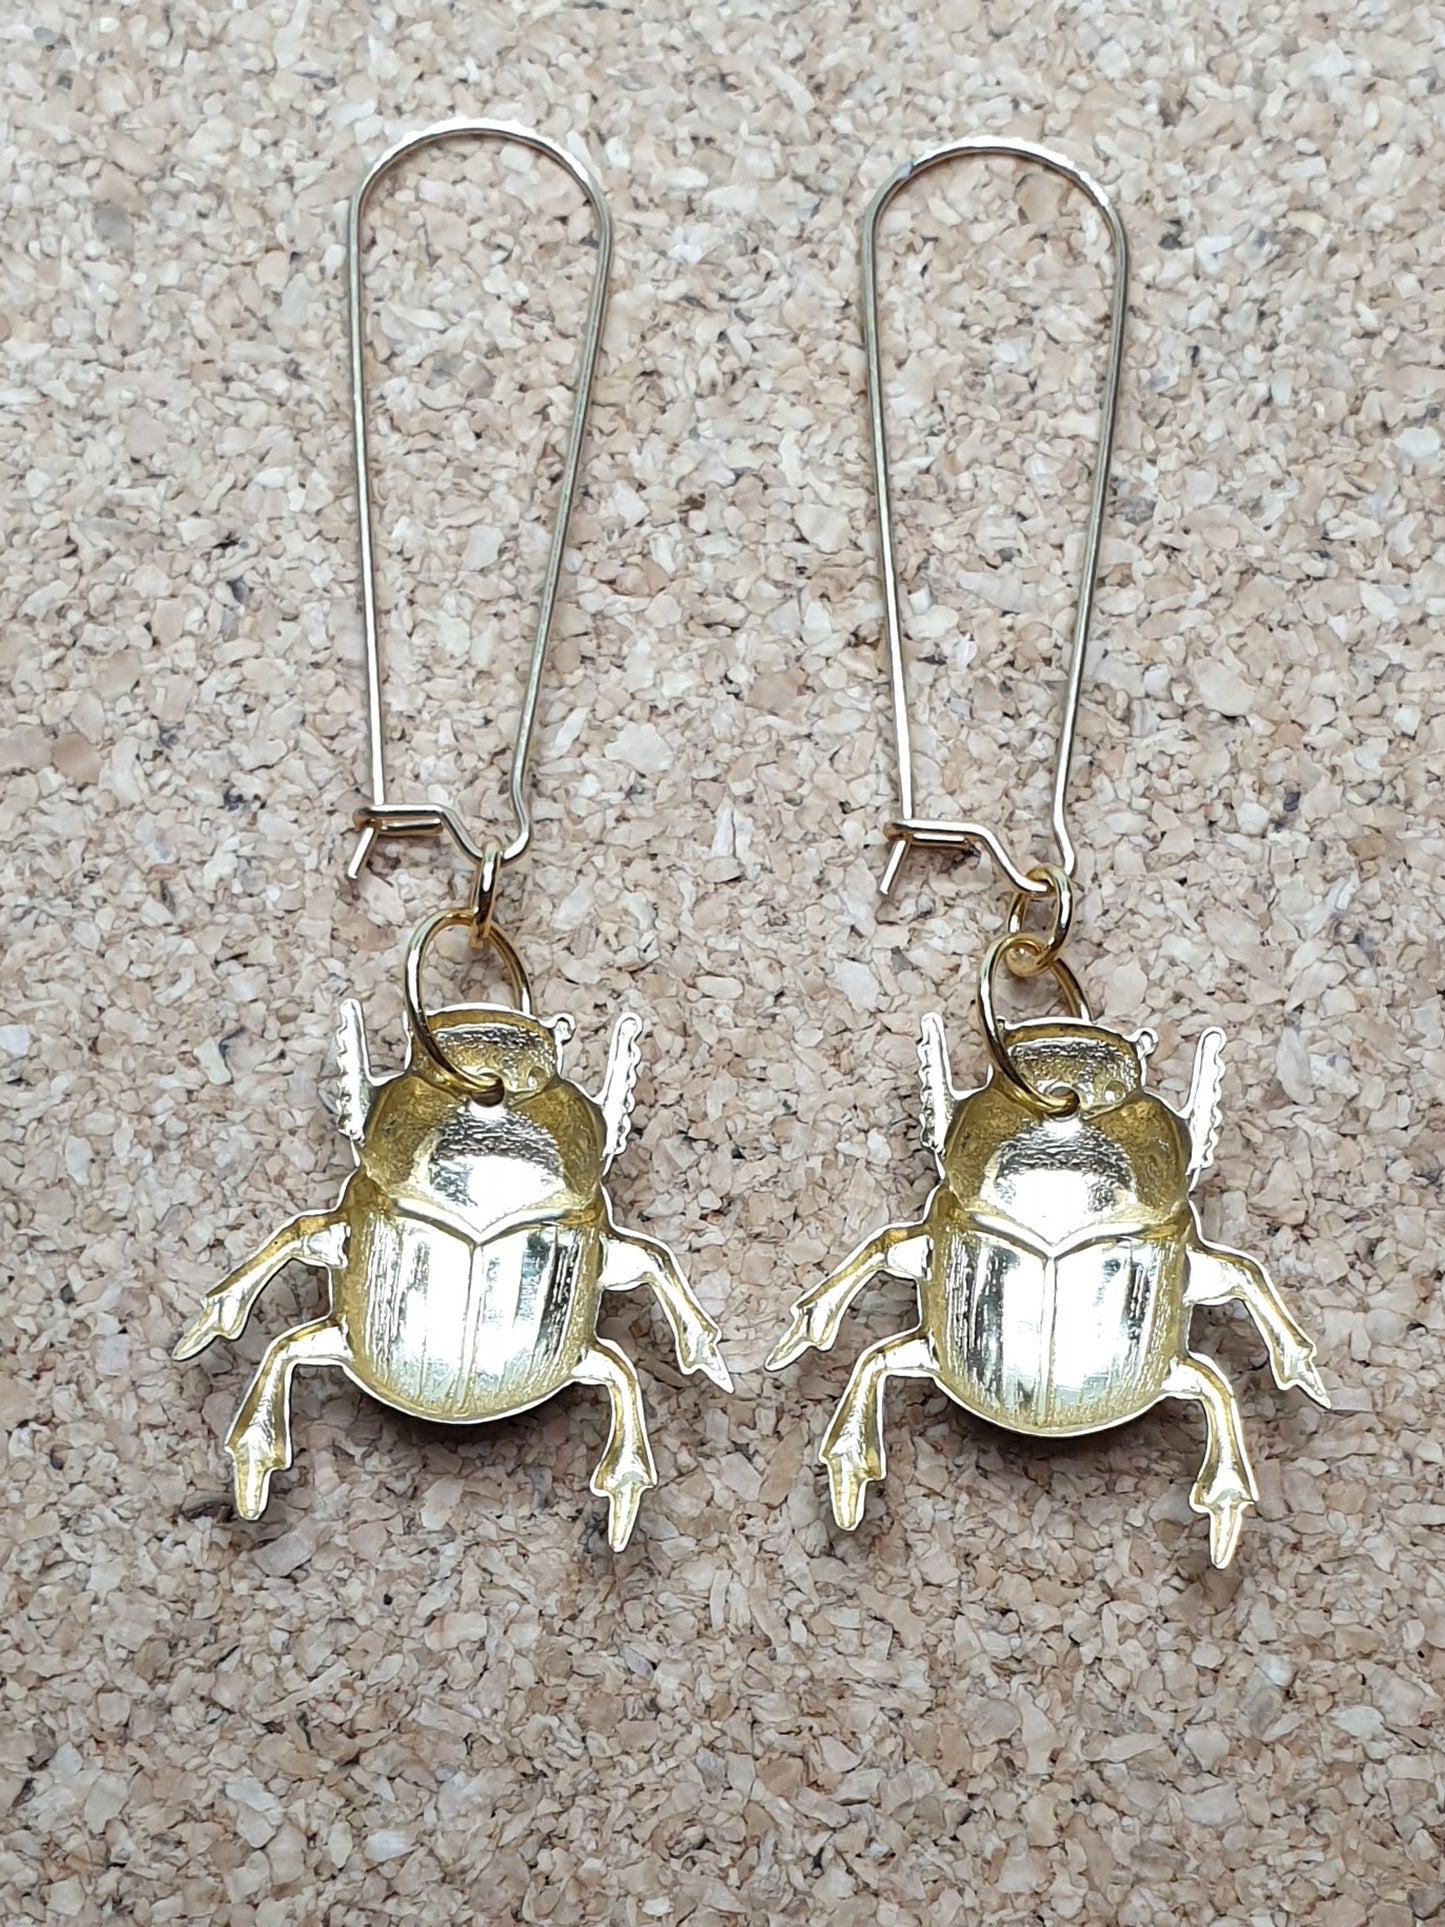 Dung Beetles on long hooks - Brass & Stainless Steel